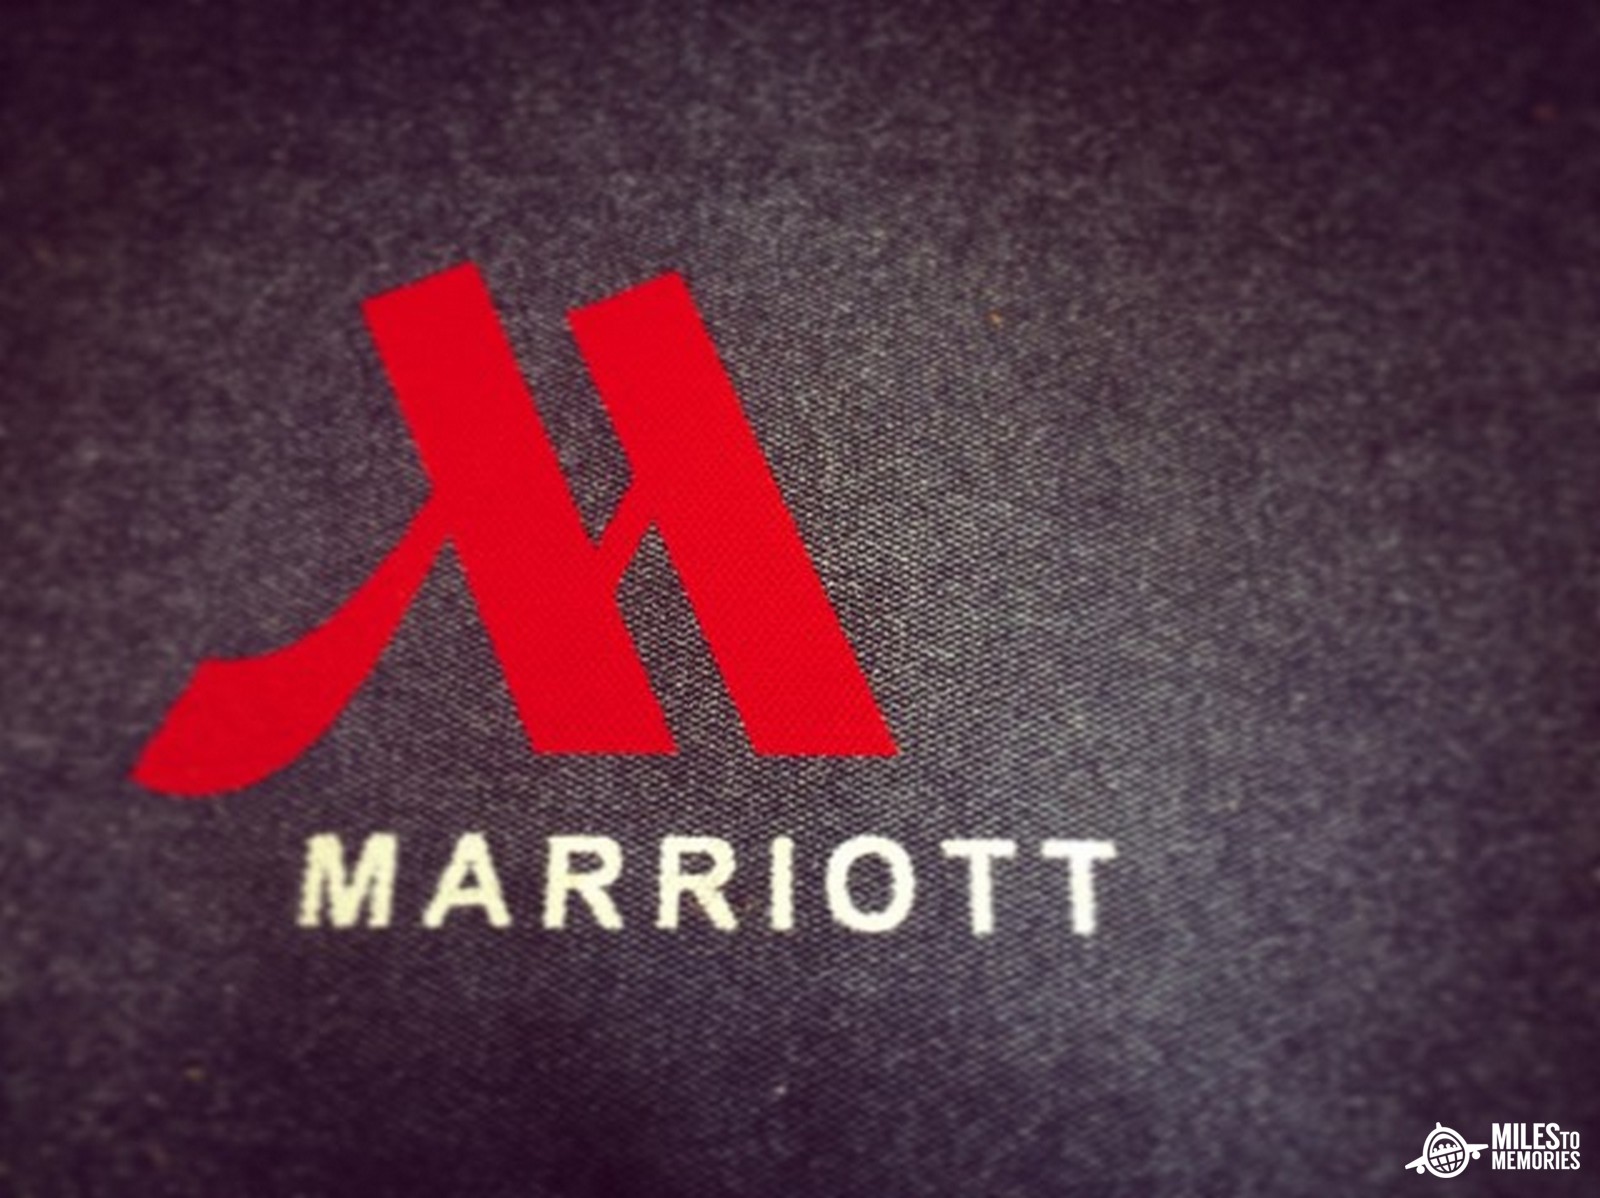 Question: Can I Do A Marriott Search By Category For Cheap Hotels?